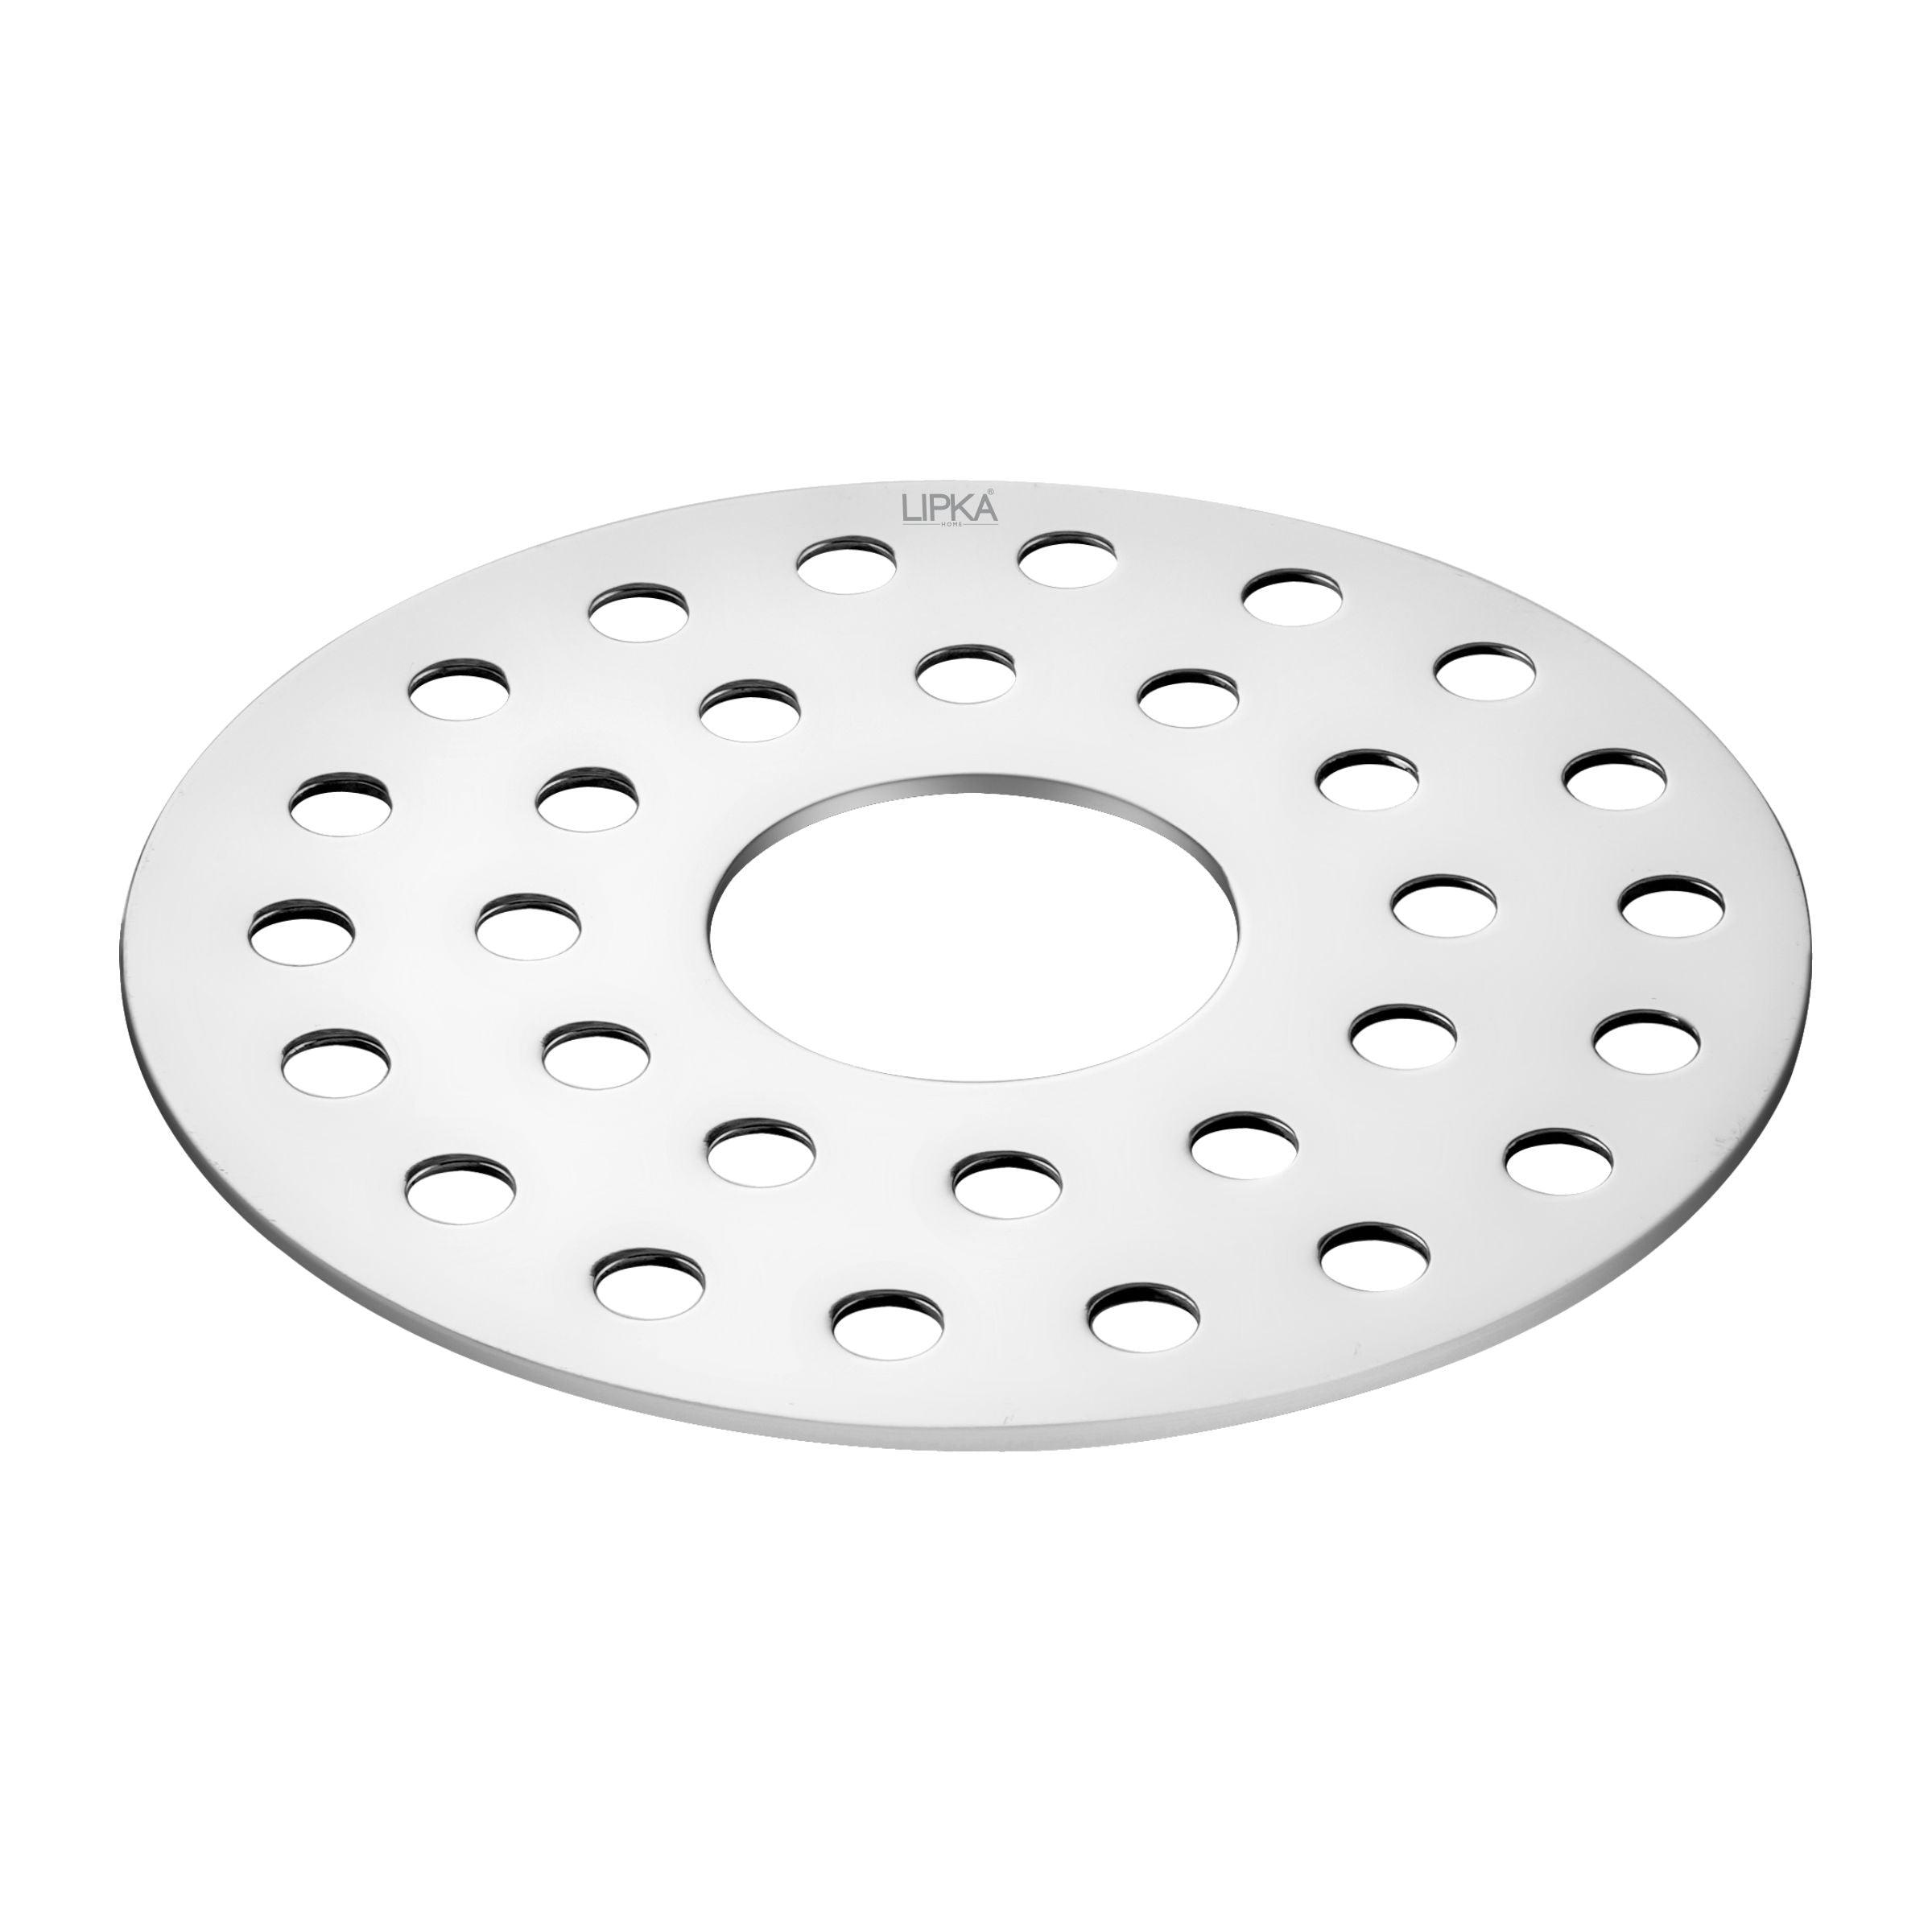 Plain Round Jali Floor Drain with Hole (3 inches)